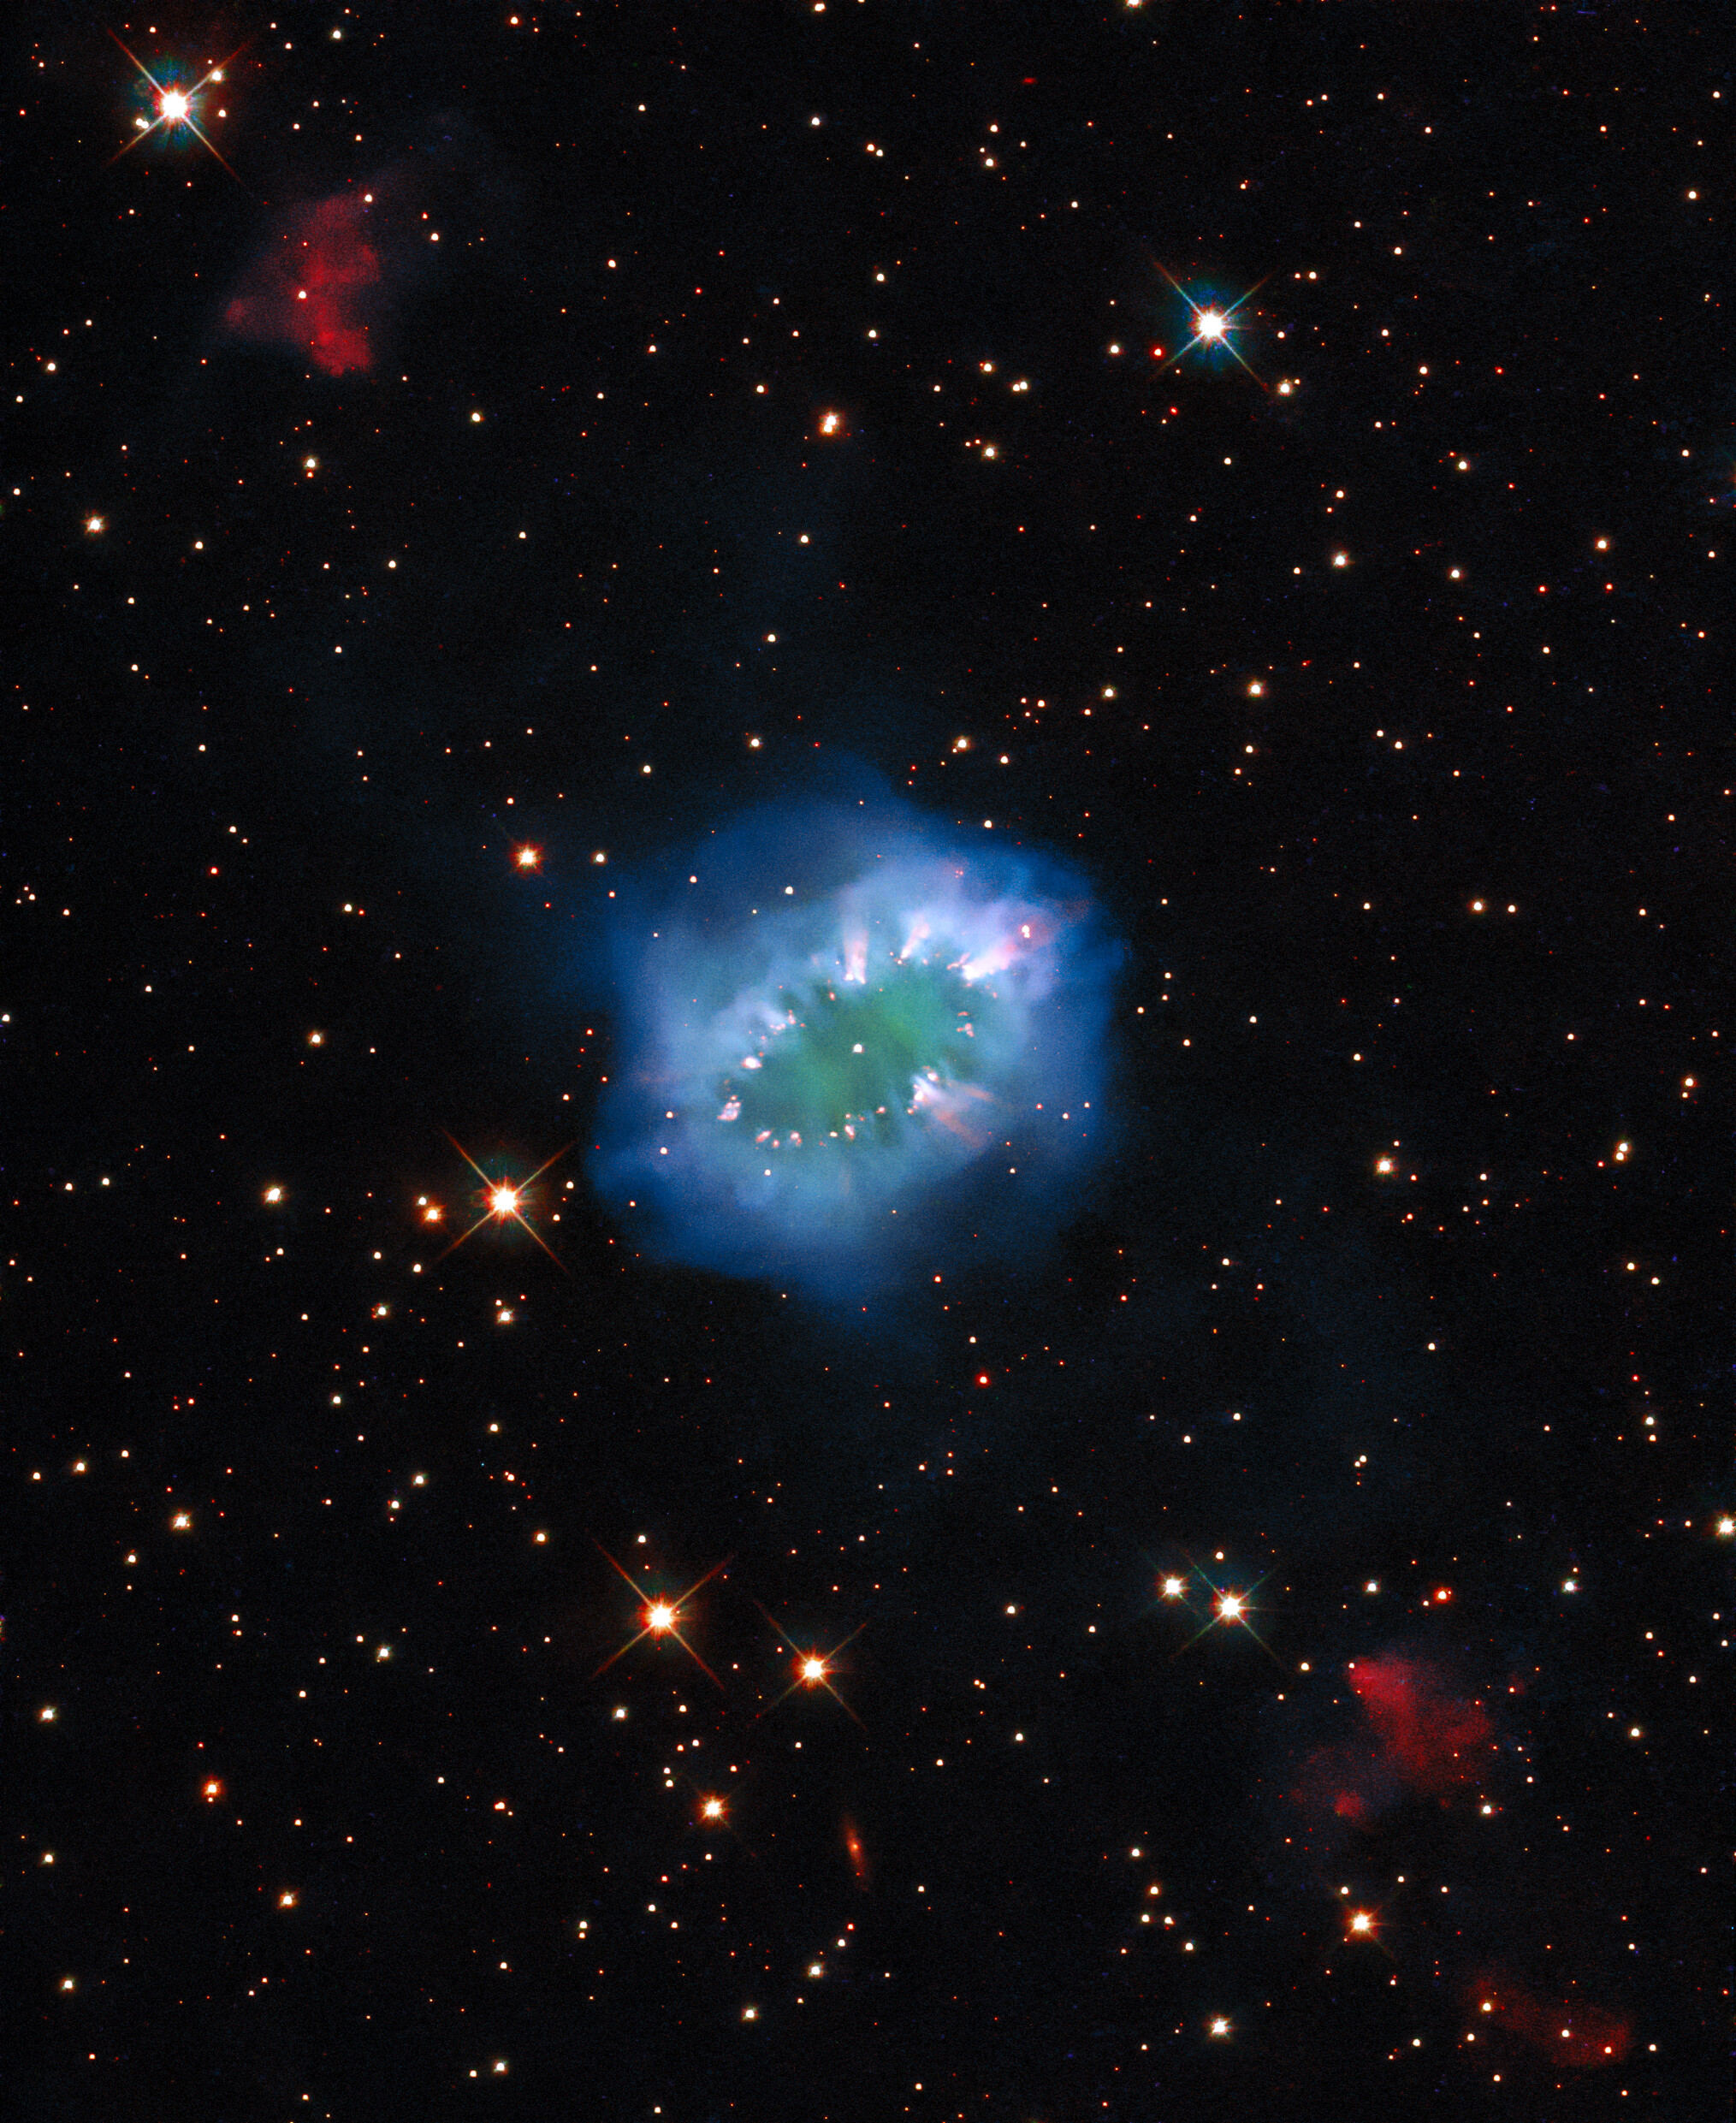 Hubble Views a Dazzling Cosmic Necklace